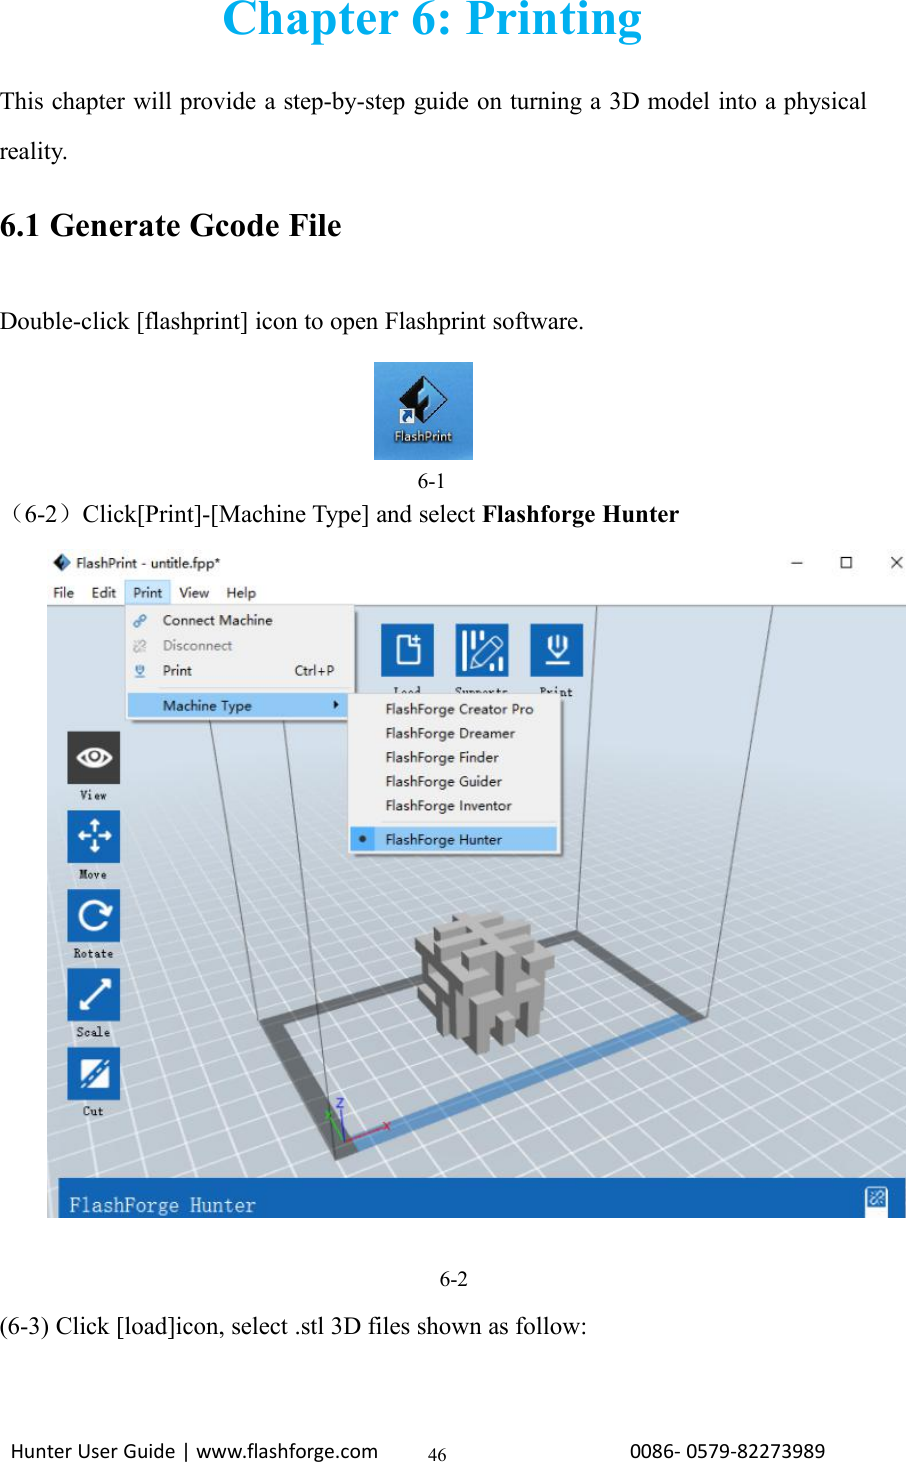 Hunter User Guide | www.flashforge.com 0086- 0579-8227398946Chapter 6: PrintingThis chapter will provide a step-by-step guide on turning a 3D model into a physicalreality.6.1 Generate Gcode FileDouble-click [flashprint] icon to open Flashprint software.6-1（6-2）Click[Print]-[Machine Type] and select Flashforge Hunter6-2(6-3) Click [load]icon, select .stl 3D files shown as follow: